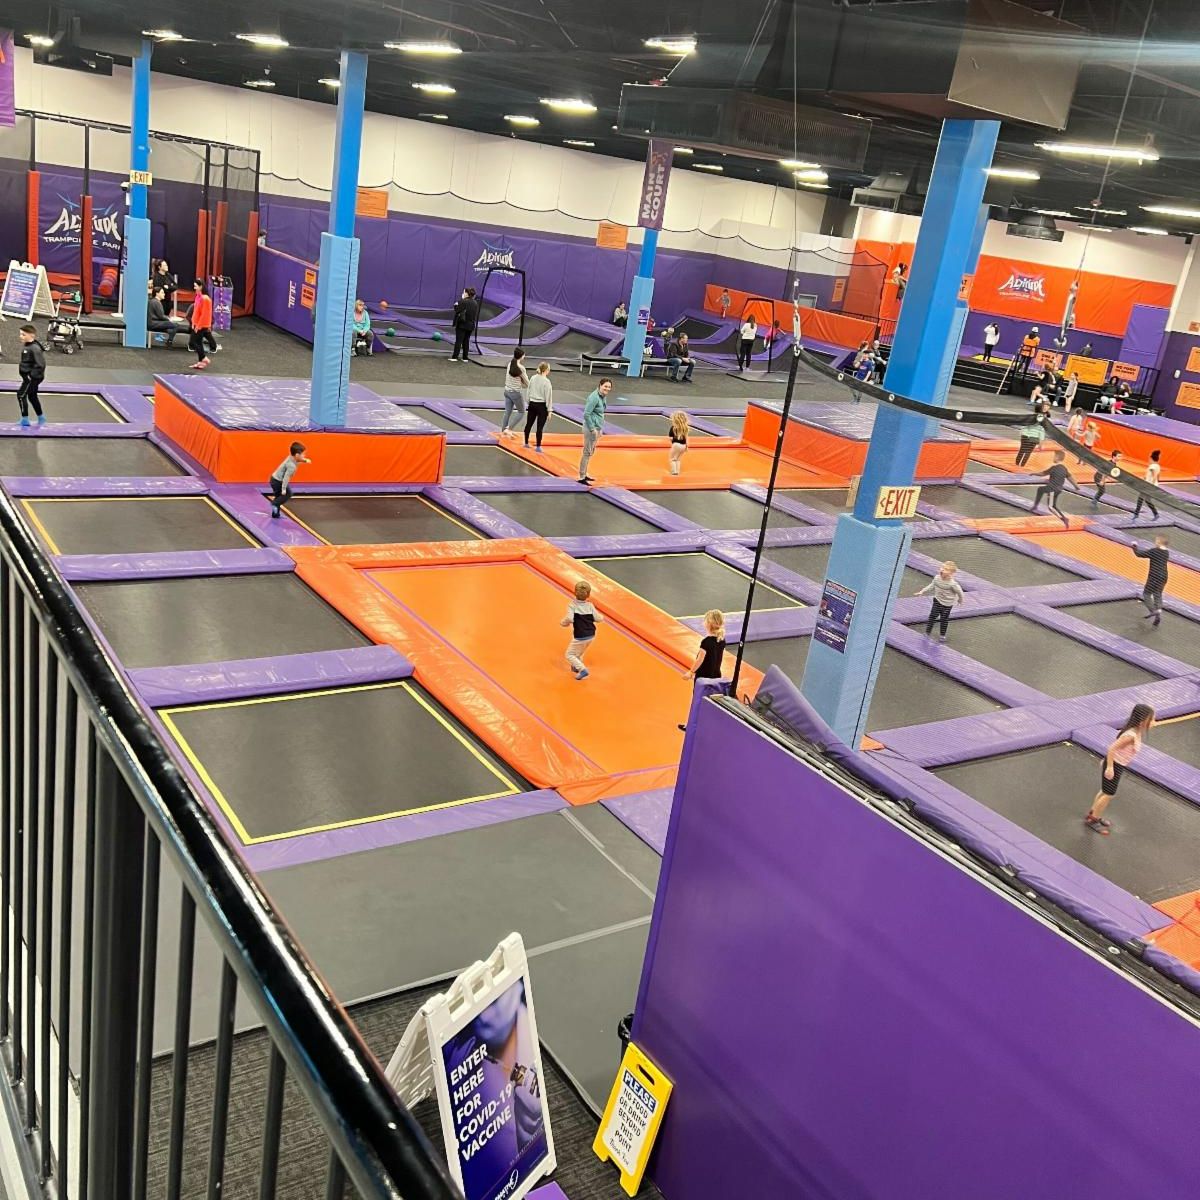 An indoor trampoline park. Kids are having fun and exploring different trampolines on the floor.